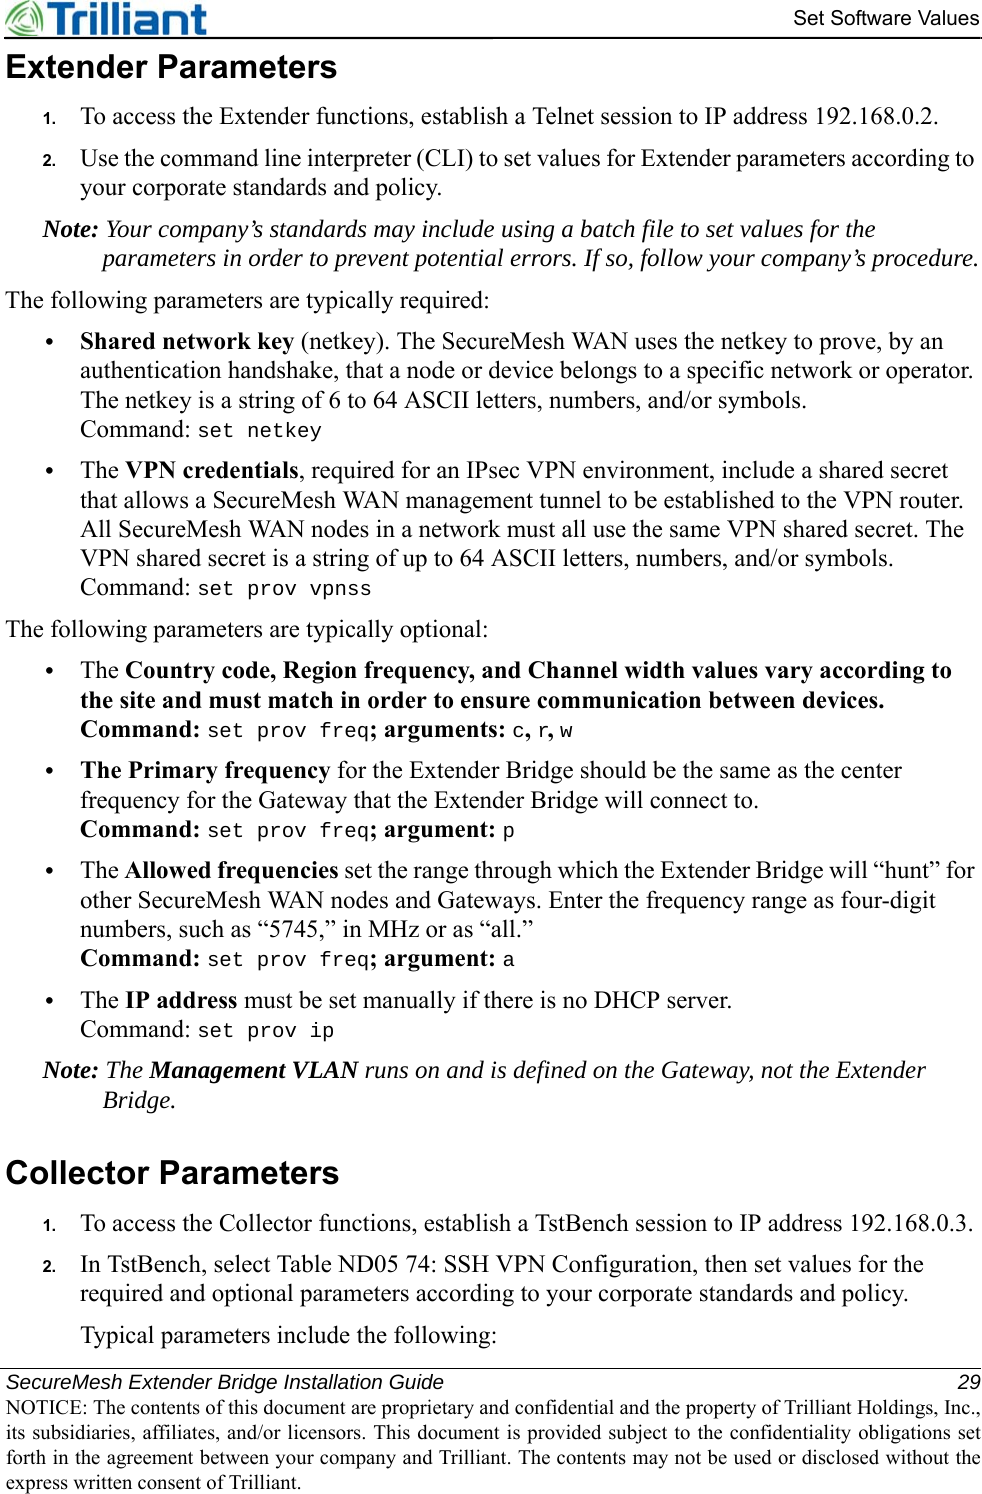 SecureMesh Extender Bridge Installation Guide 29NOTICE: The contents of this document are proprietary and confidential and the property of Trilliant Holdings, Inc.,its subsidiaries, affiliates, and/or licensors. This document is provided subject to the confidentiality obligations setforth in the agreement between your company and Trilliant. The contents may not be used or disclosed without theexpress written consent of Trilliant.Set Software ValuesExtender Parameters1. To access the Extender functions, establish a Telnet session to IP address 192.168.0.2.2. Use the command line interpreter (CLI) to set values for Extender parameters according to your corporate standards and policy.Note: Your company’s standards may include using a batch file to set values for the parameters in order to prevent potential errors. If so, follow your company’s procedure.The following parameters are typically required:•Shared network key (netkey). The SecureMesh WAN uses the netkey to prove, by an authentication handshake, that a node or device belongs to a specific network or operator. The netkey is a string of 6 to 64 ASCII letters, numbers, and/or symbols.Command: set netkey•The VPN credentials, required for an IPsec VPN environment, include a shared secret that allows a SecureMesh WAN management tunnel to be established to the VPN router. All SecureMesh WAN nodes in a network must all use the same VPN shared secret. The VPN shared secret is a string of up to 64 ASCII letters, numbers, and/or symbols.Command: set prov vpnssThe following parameters are typically optional:•The Country code, Region frequency, and Channel width values vary according to the site and must match in order to ensure communication between devices.Command: set prov freq; arguments: c, r, w•The Primary frequency for the Extender Bridge should be the same as the center frequency for the Gateway that the Extender Bridge will connect to.Command: set prov freq; argument: p•The Allowed frequencies set the range through which the Extender Bridge will “hunt” for other SecureMesh WAN nodes and Gateways. Enter the frequency range as four-digit numbers, such as “5745,” in MHz or as “all.”Command: set prov freq; argument: a•The IP address must be set manually if there is no DHCP server.Command: set prov ipNote: The Management VLAN runs on and is defined on the Gateway, not the Extender Bridge.Collector Parameters1. To access the Collector functions, establish a TstBench session to IP address 192.168.0.3.2. In TstBench, select Table ND05 74: SSH VPN Configuration, then set values for the required and optional parameters according to your corporate standards and policy.Typical parameters include the following: